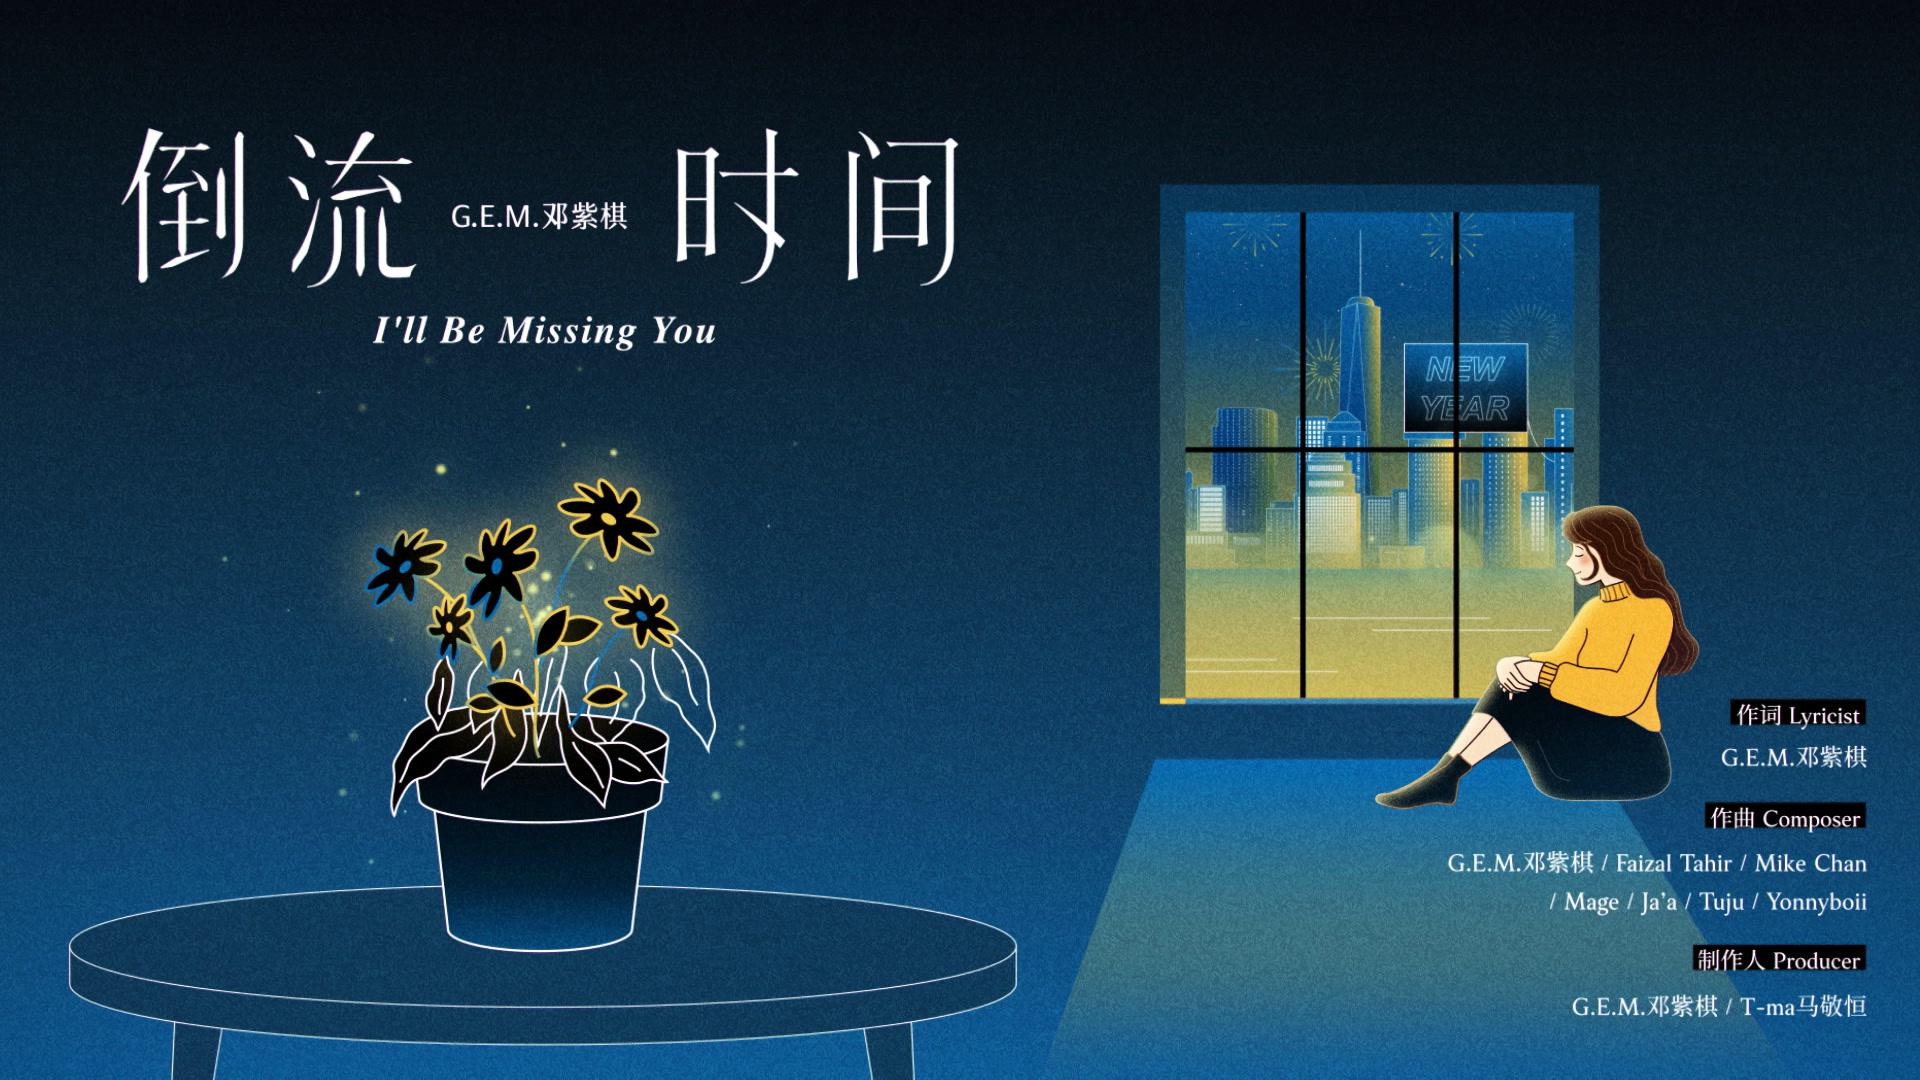 G.E.M.邓紫棋 - I'll Be Missing You